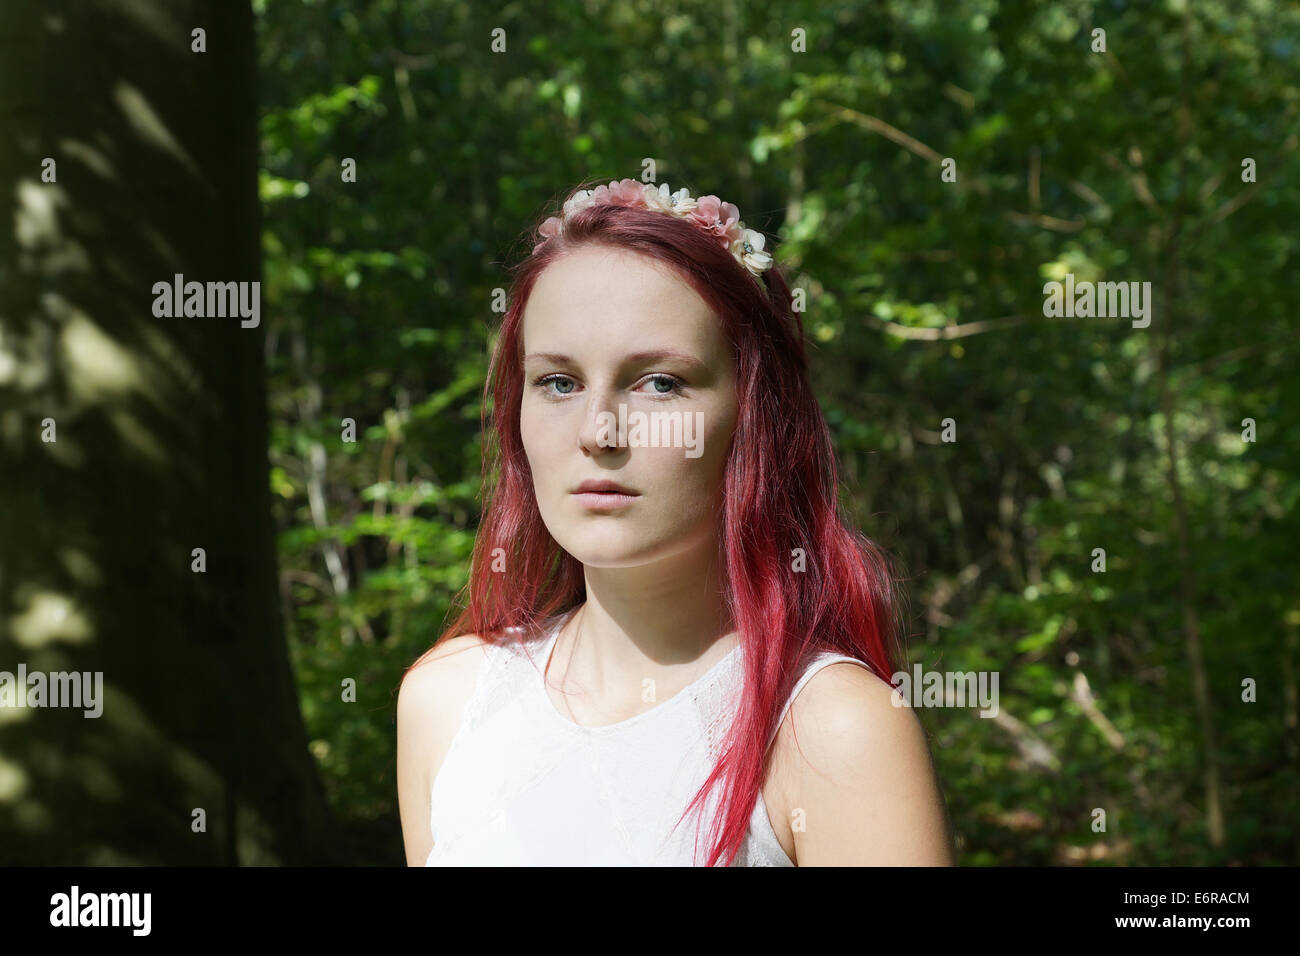 young woman with flowers in her hair in a forest Stock Photo